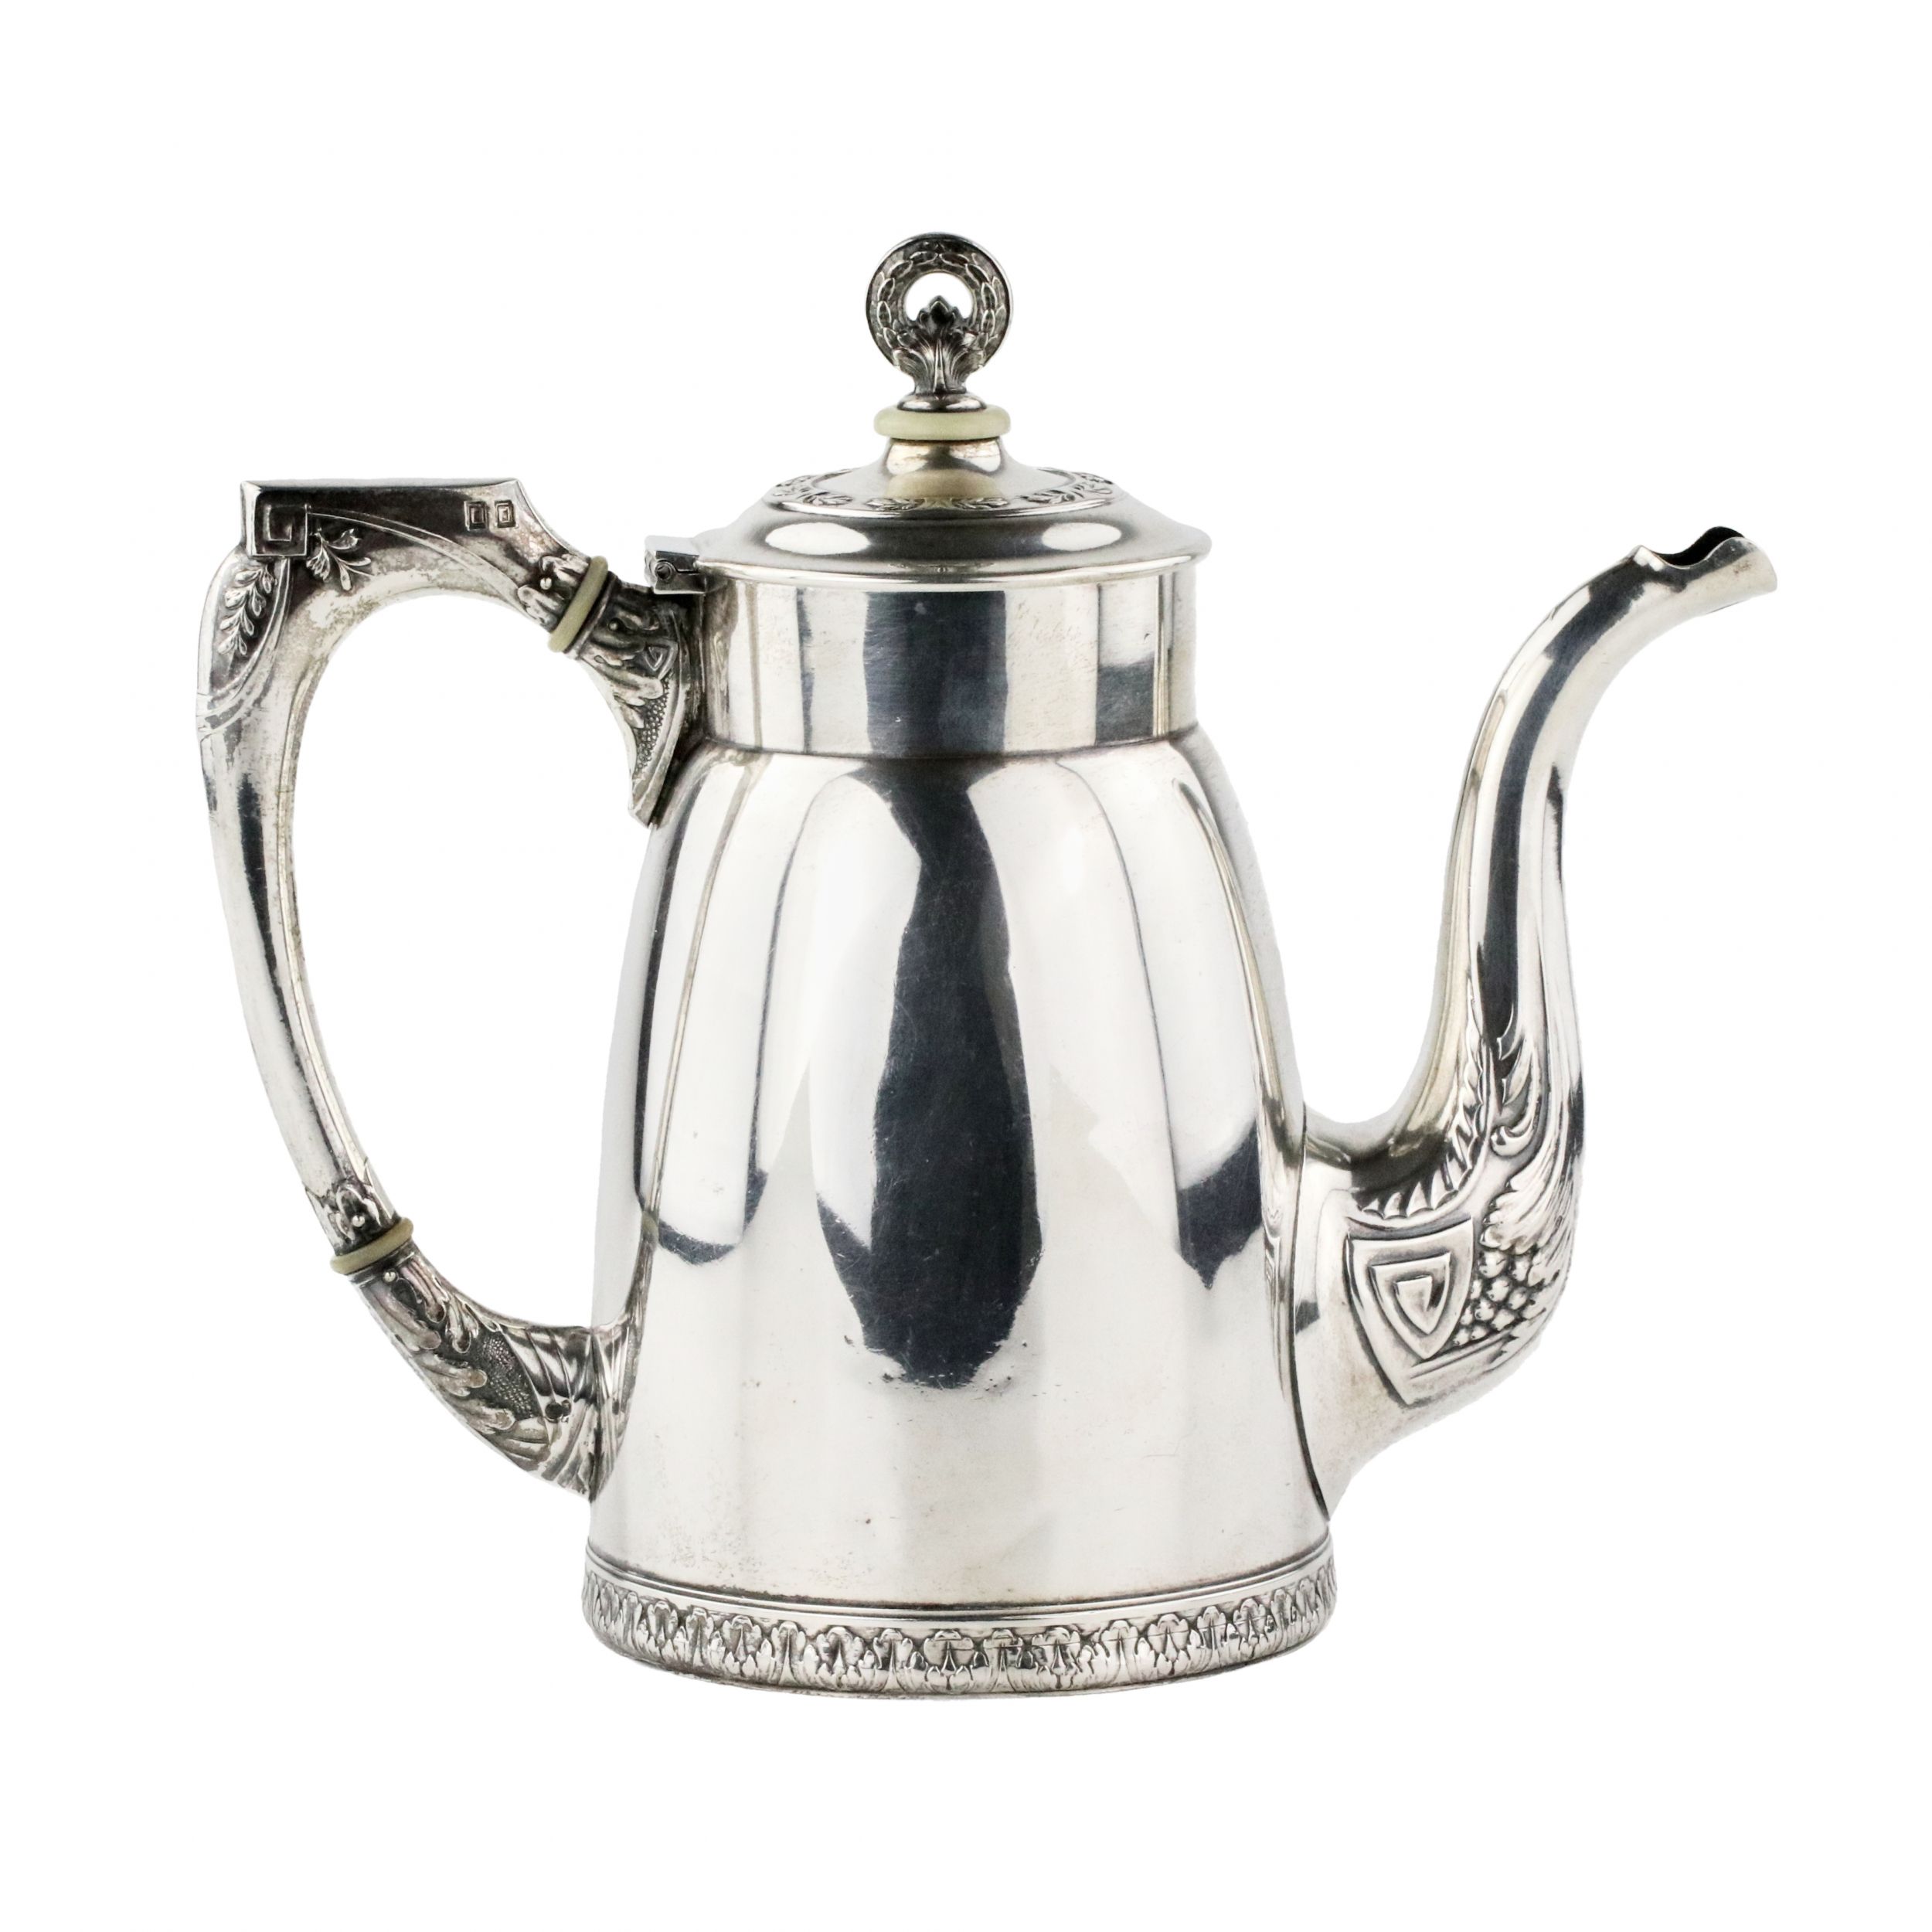 Russian silver tea and coffee service. 2nd Moscow Artel. 1908-1917. - Image 3 of 15